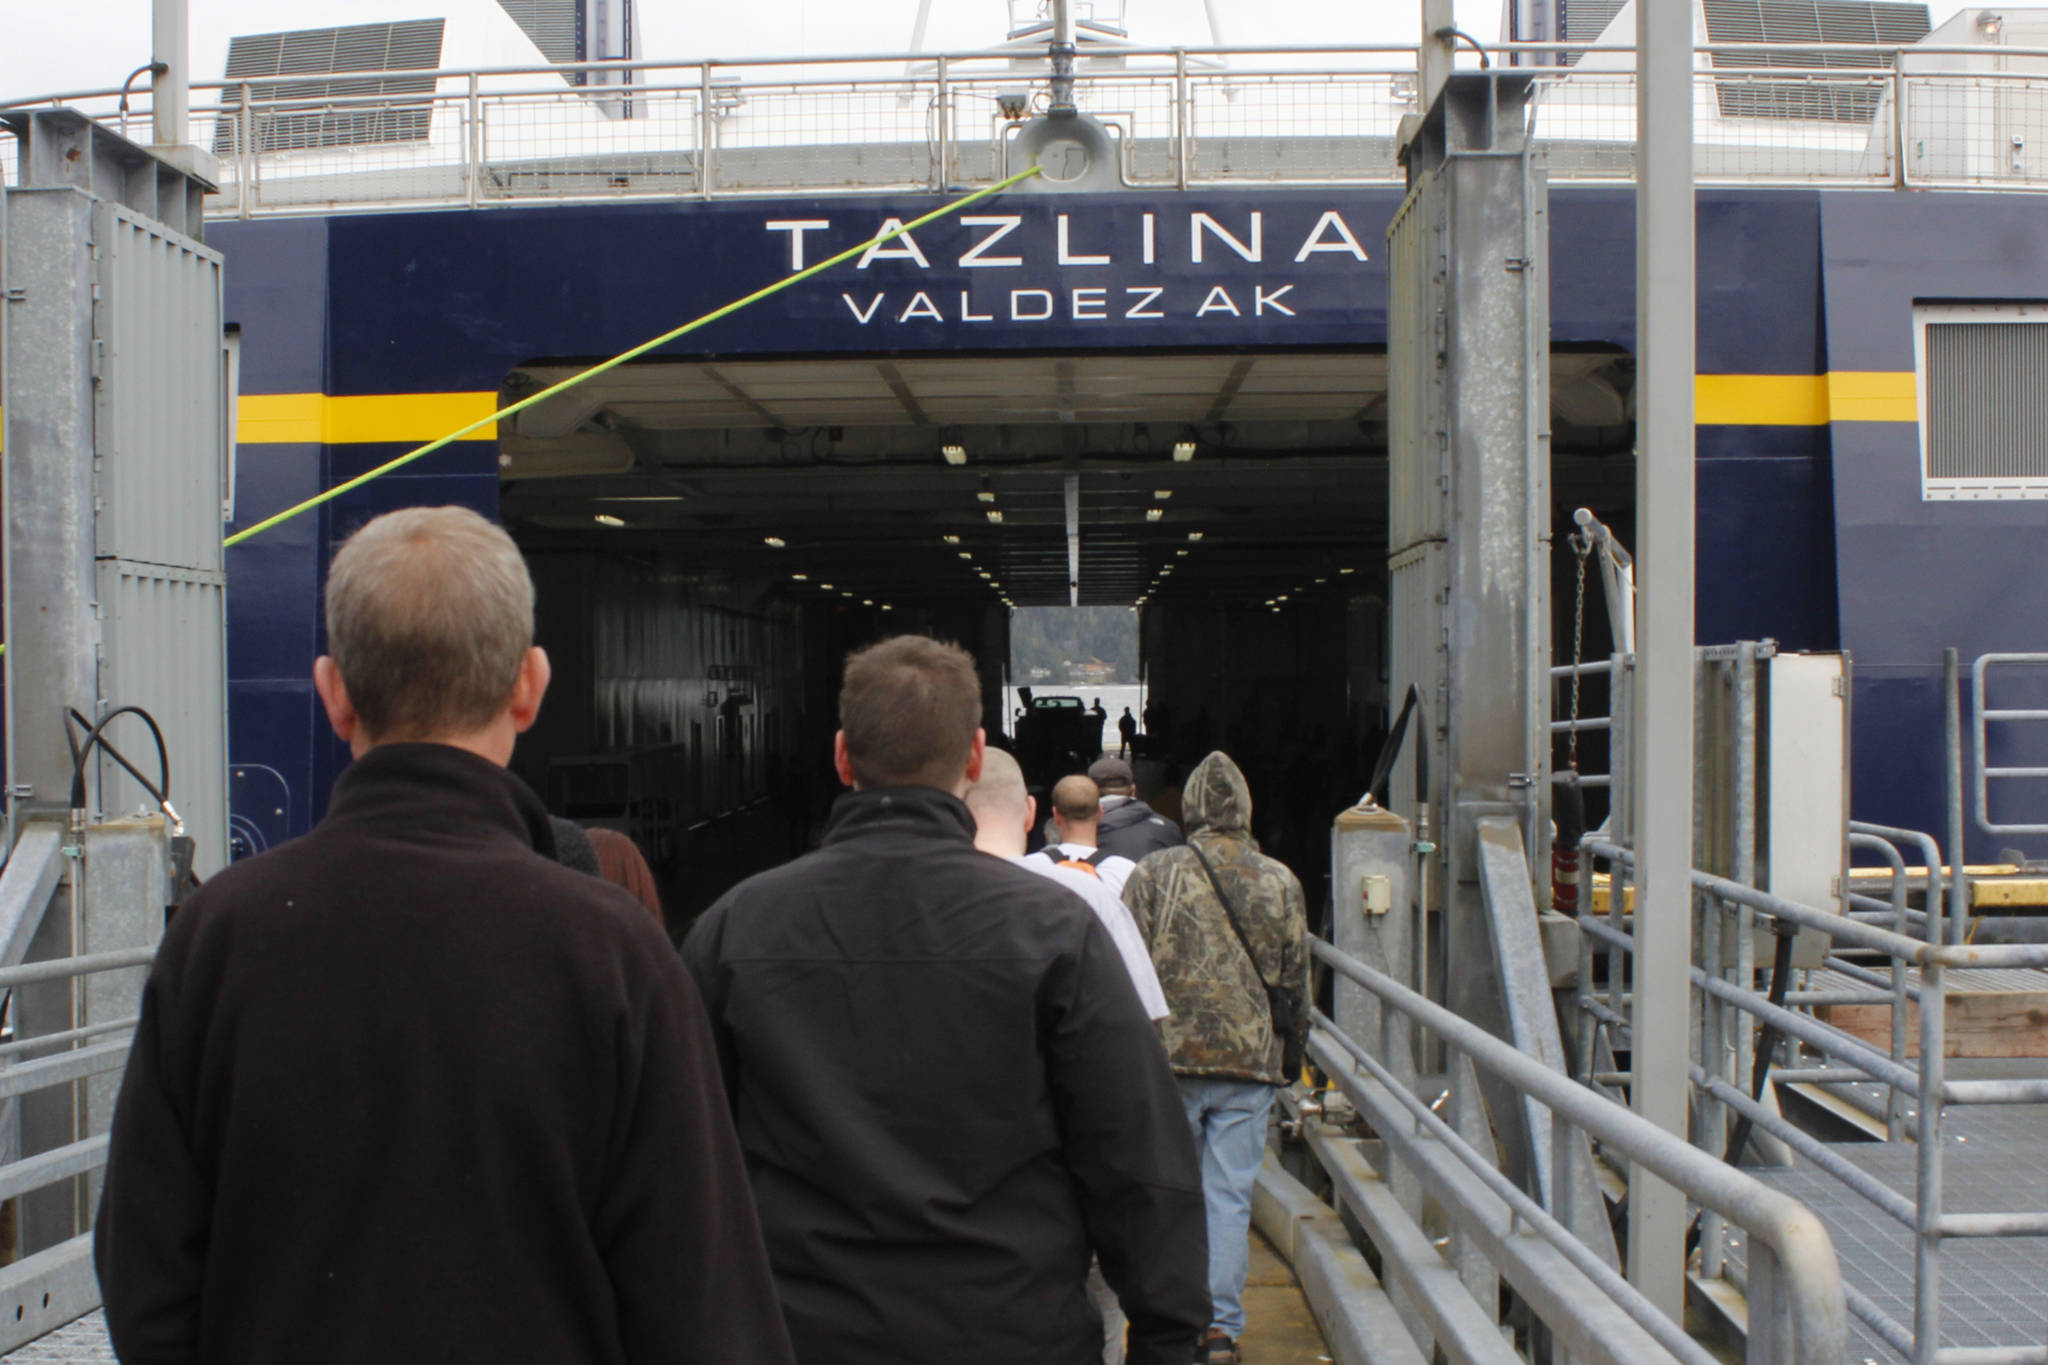 Members of the public walk onto the ferry Tazlina on Sunday, May 5, 2019. (Alex McCarthy | Juneau Empire)